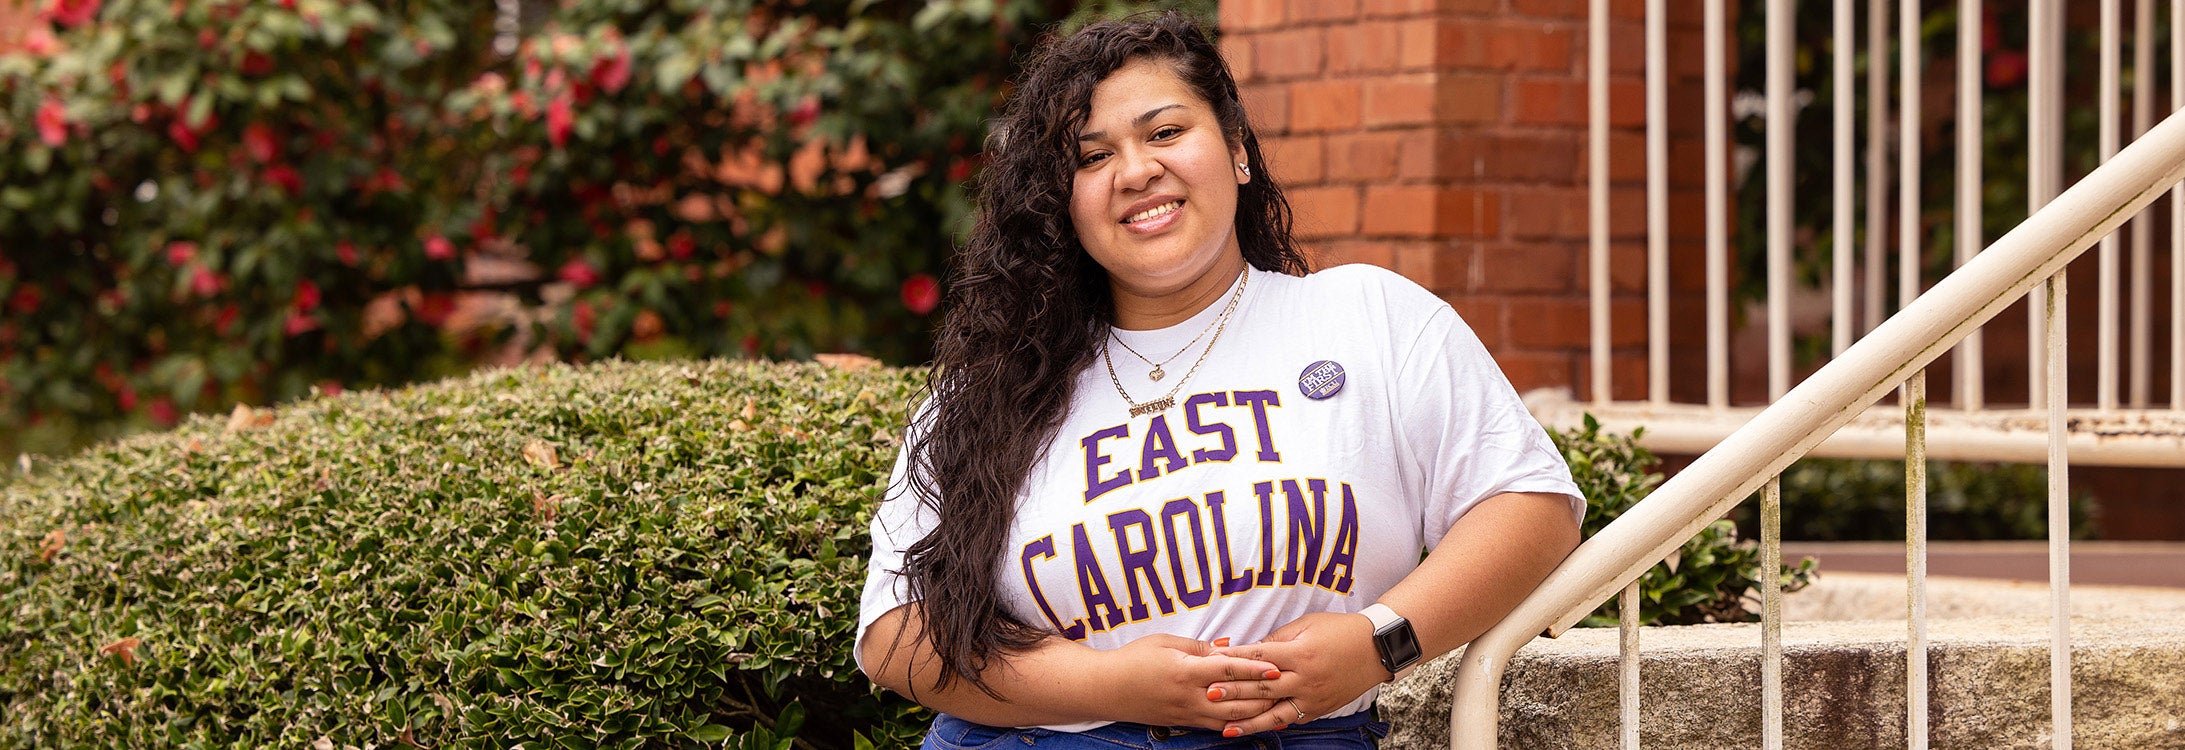 Jocelyne Alfaro-Ruiz is a first-generation student and president of the student-led I’m the First organization at ECU. (Photo by Rhett Butler)